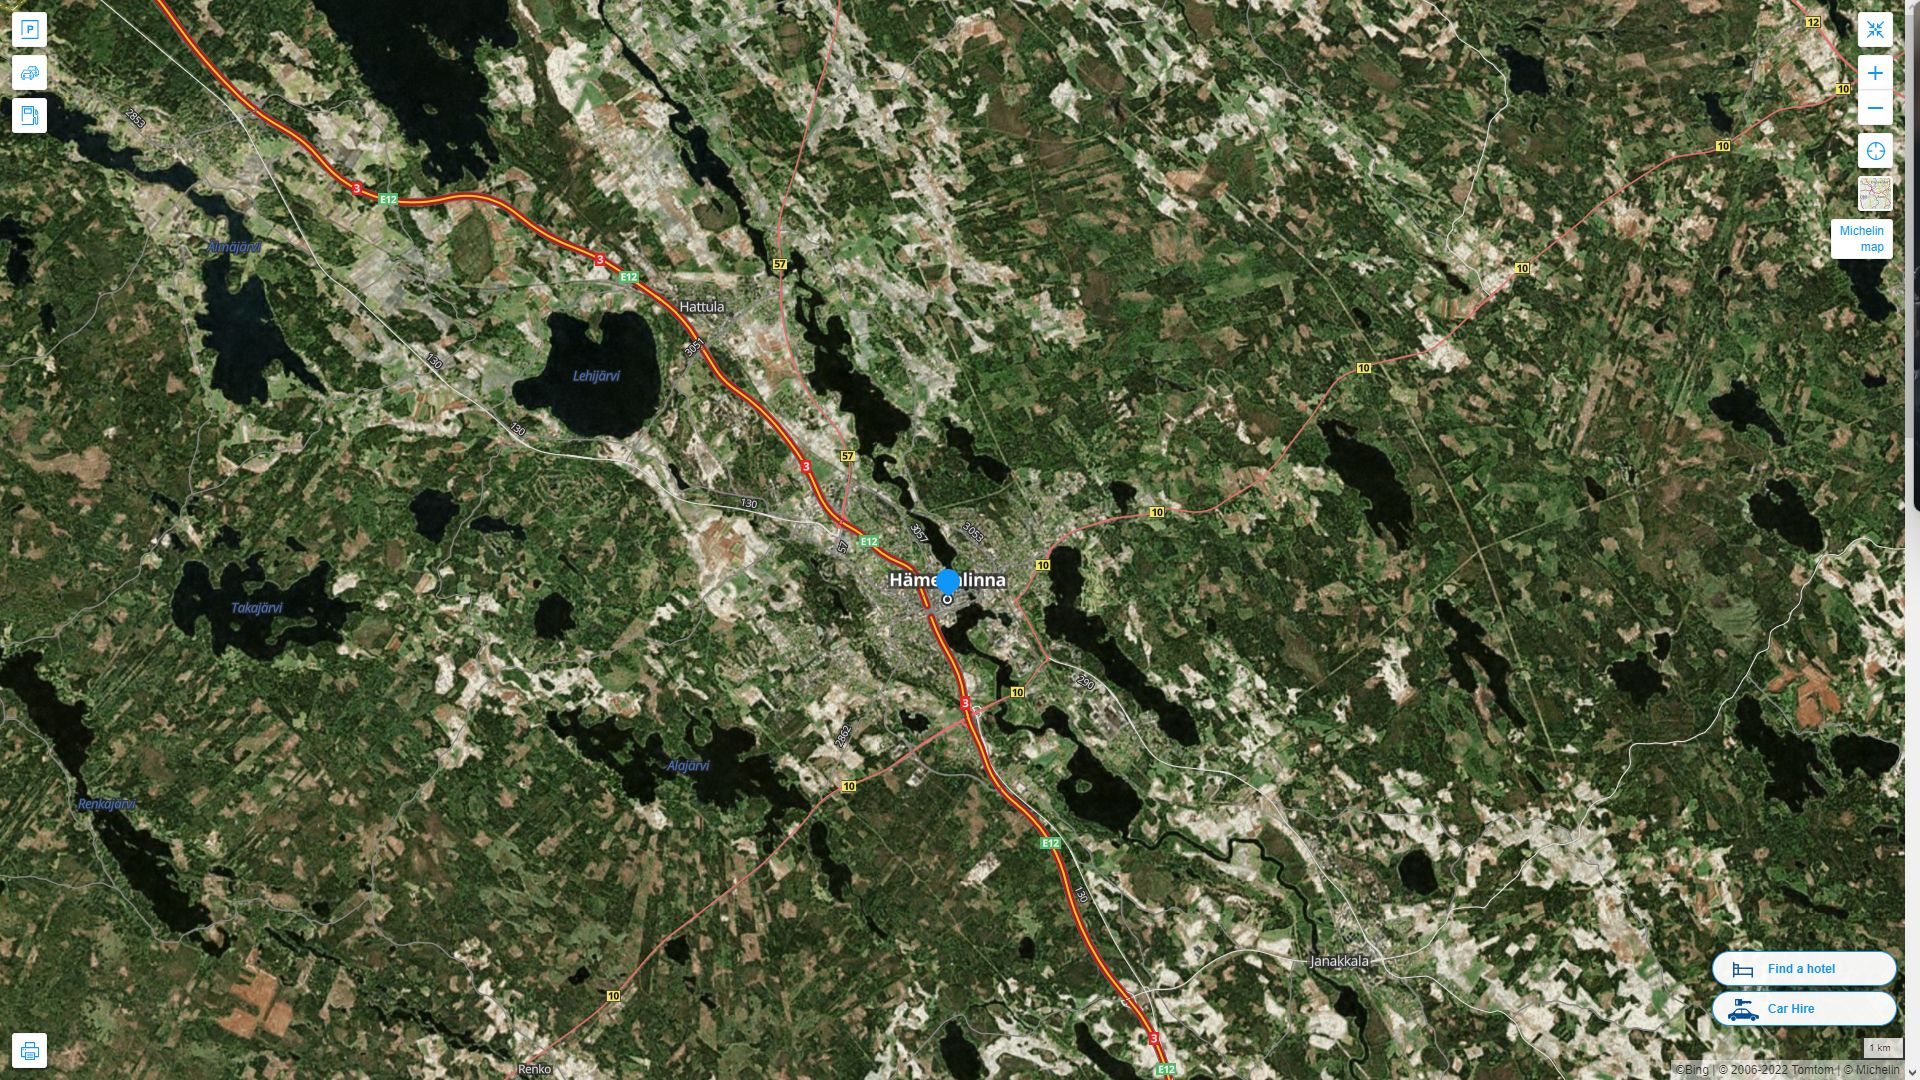 Hameenlinna Highway and Road Map with Satellite View